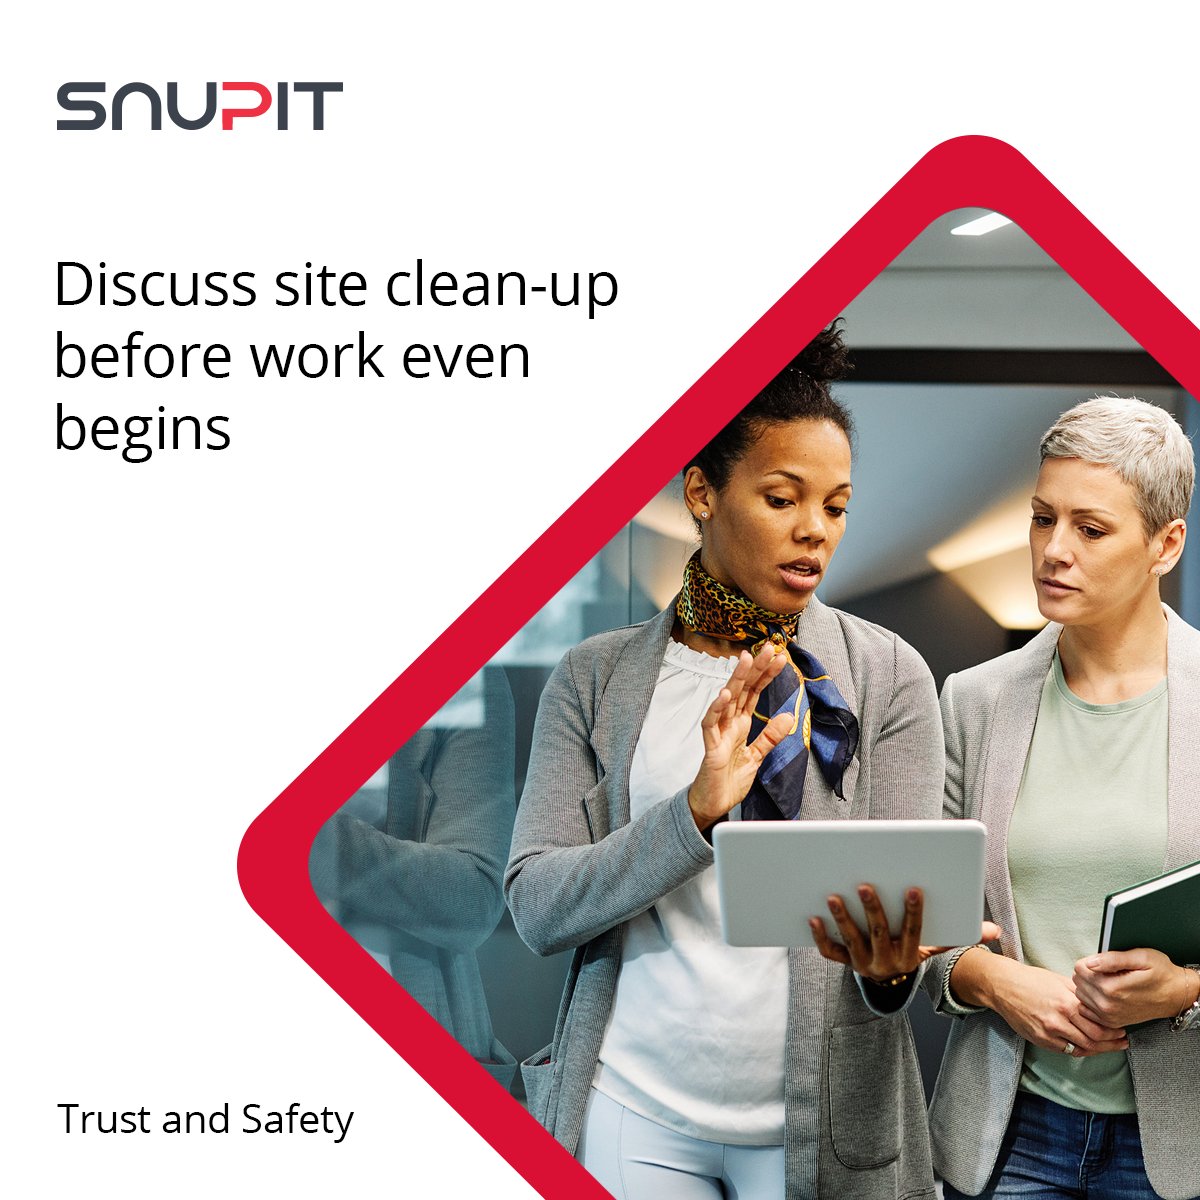 It’s a good idea to discuss whether you or your contractor will be responsible for covering up or moving the furniture and other delicate items during construction, as well as whether removal of refuse and rubble is included within your quotation. #smarthiringtips #snupit